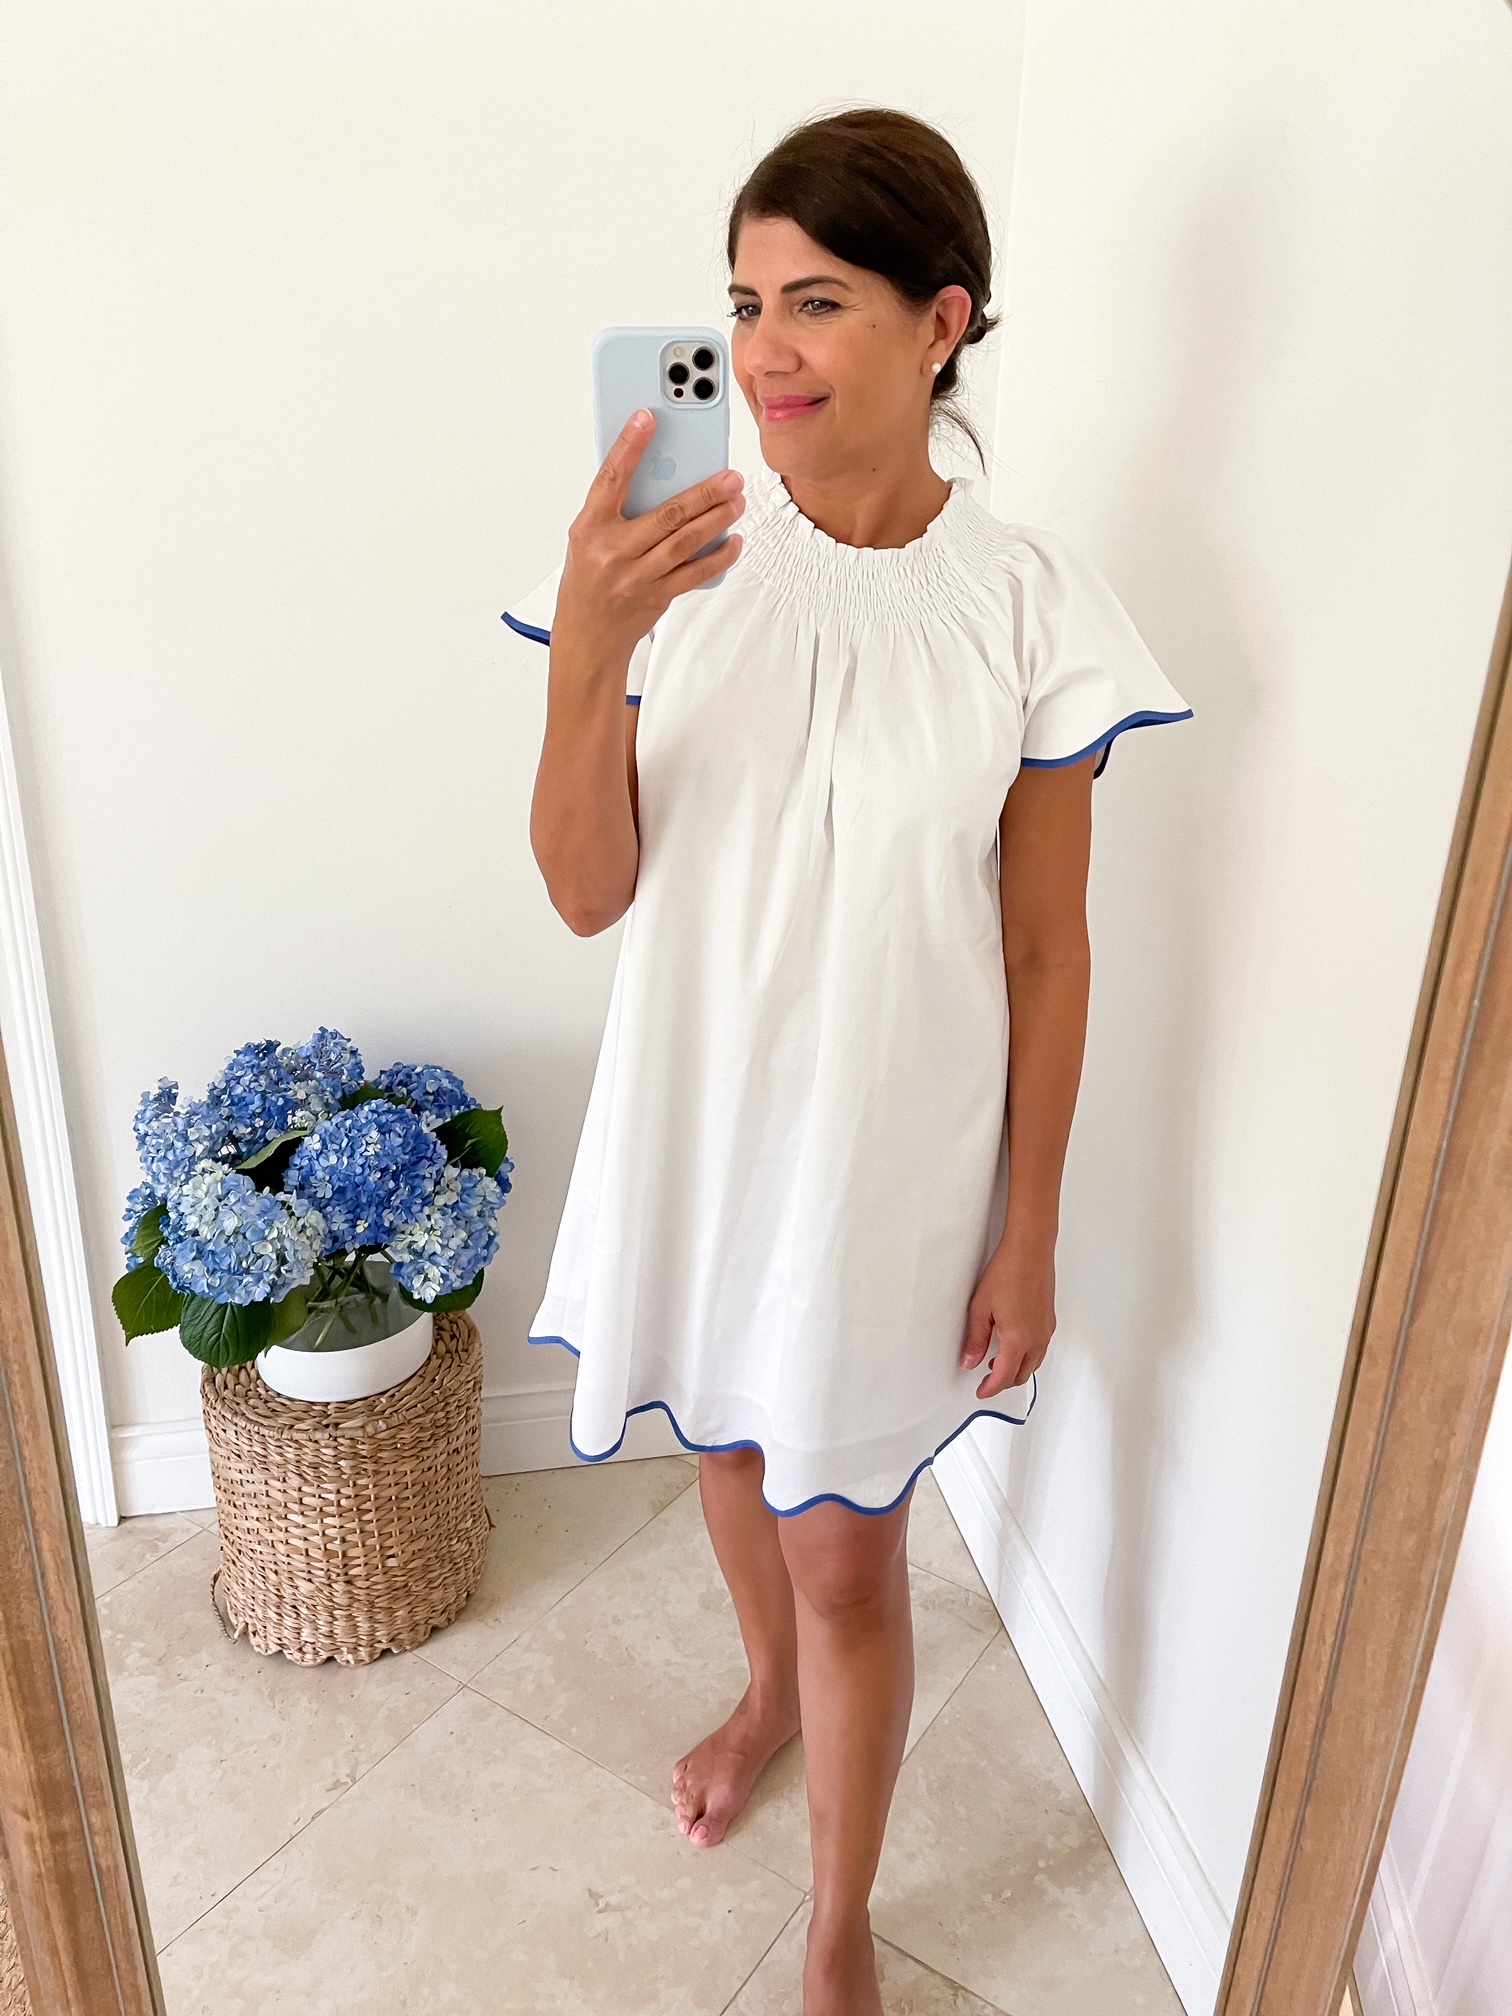 Desiree Leone of Beautifully Seaside shares details about the LAKE Pajamas Annual Sale that's up to 50% off select styles.